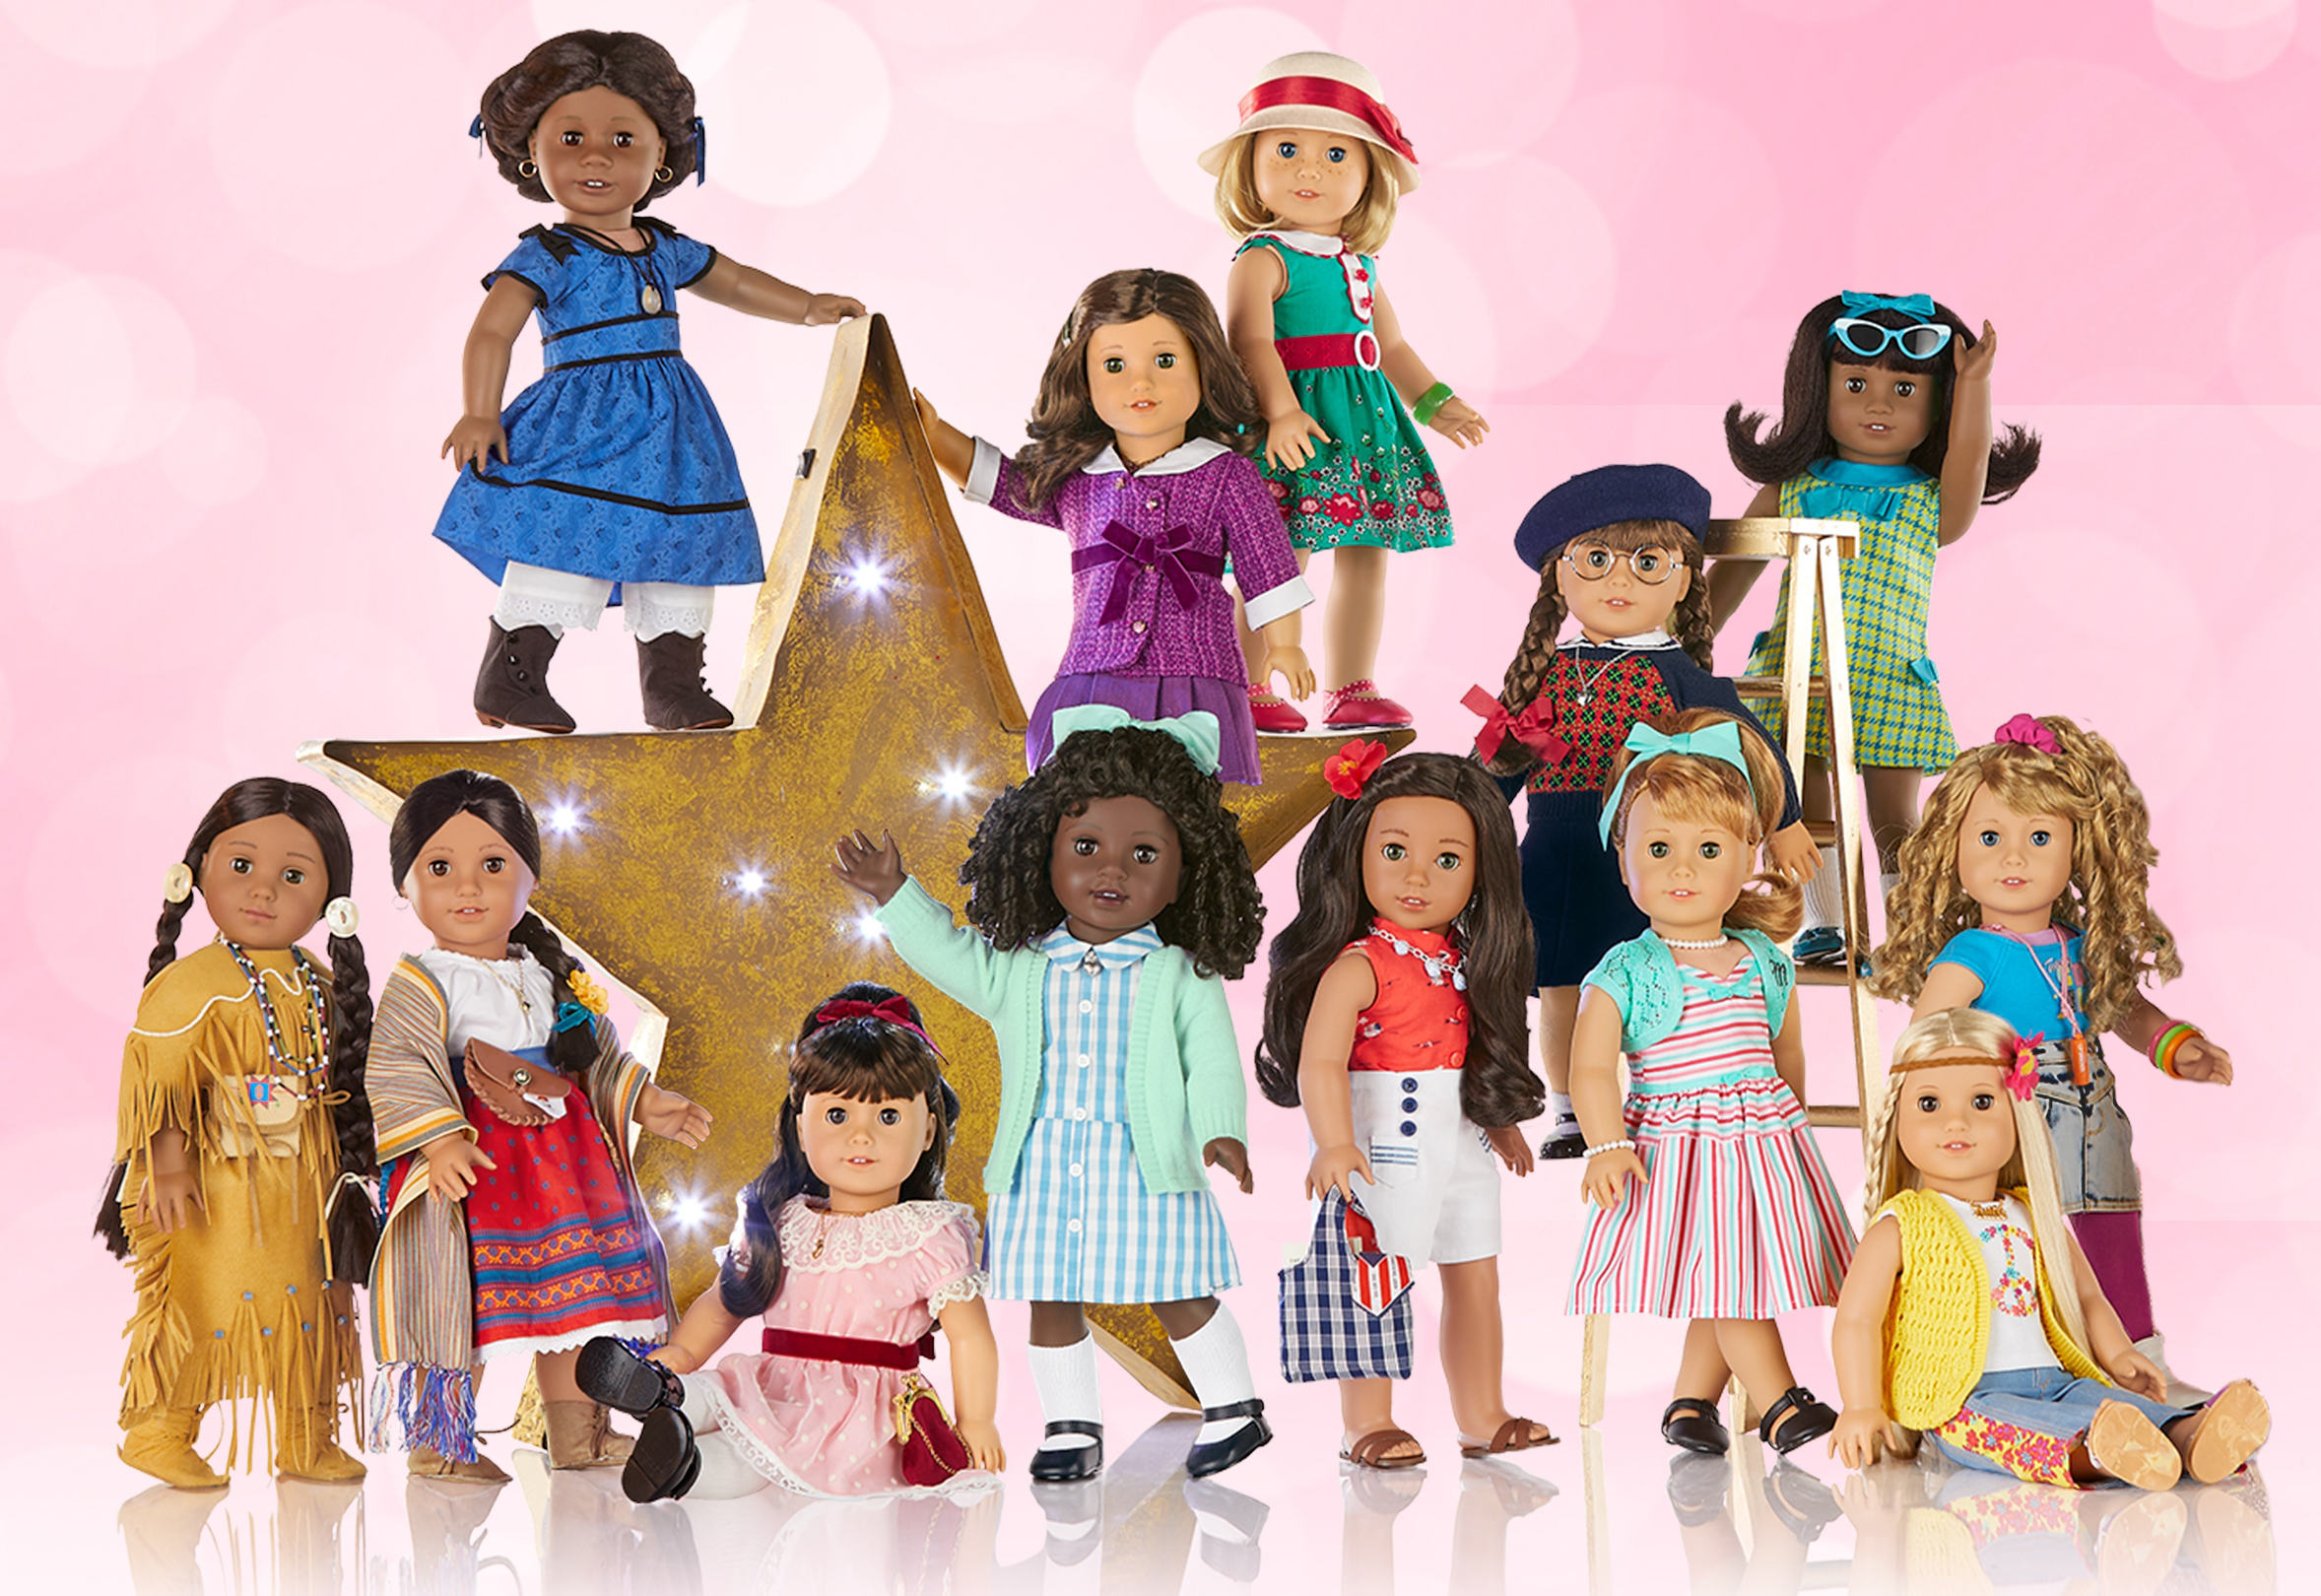 American Girl makes $5,000 doll covered in Swarovski crystals